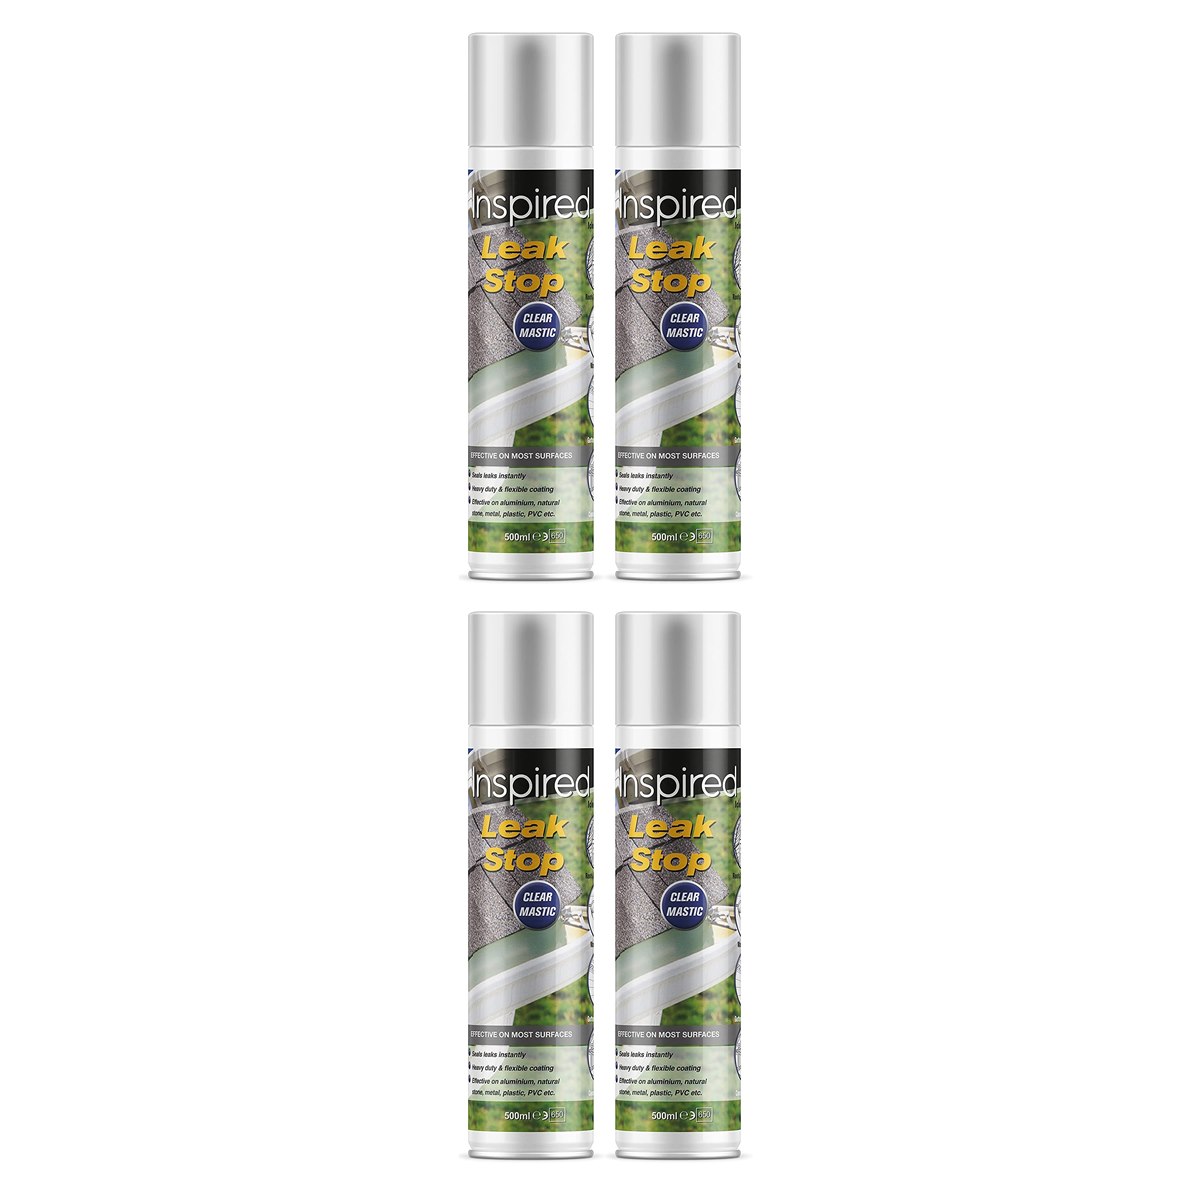 Case of 4 x Inspired Leak Stop Clear Mastic Spray 500ml